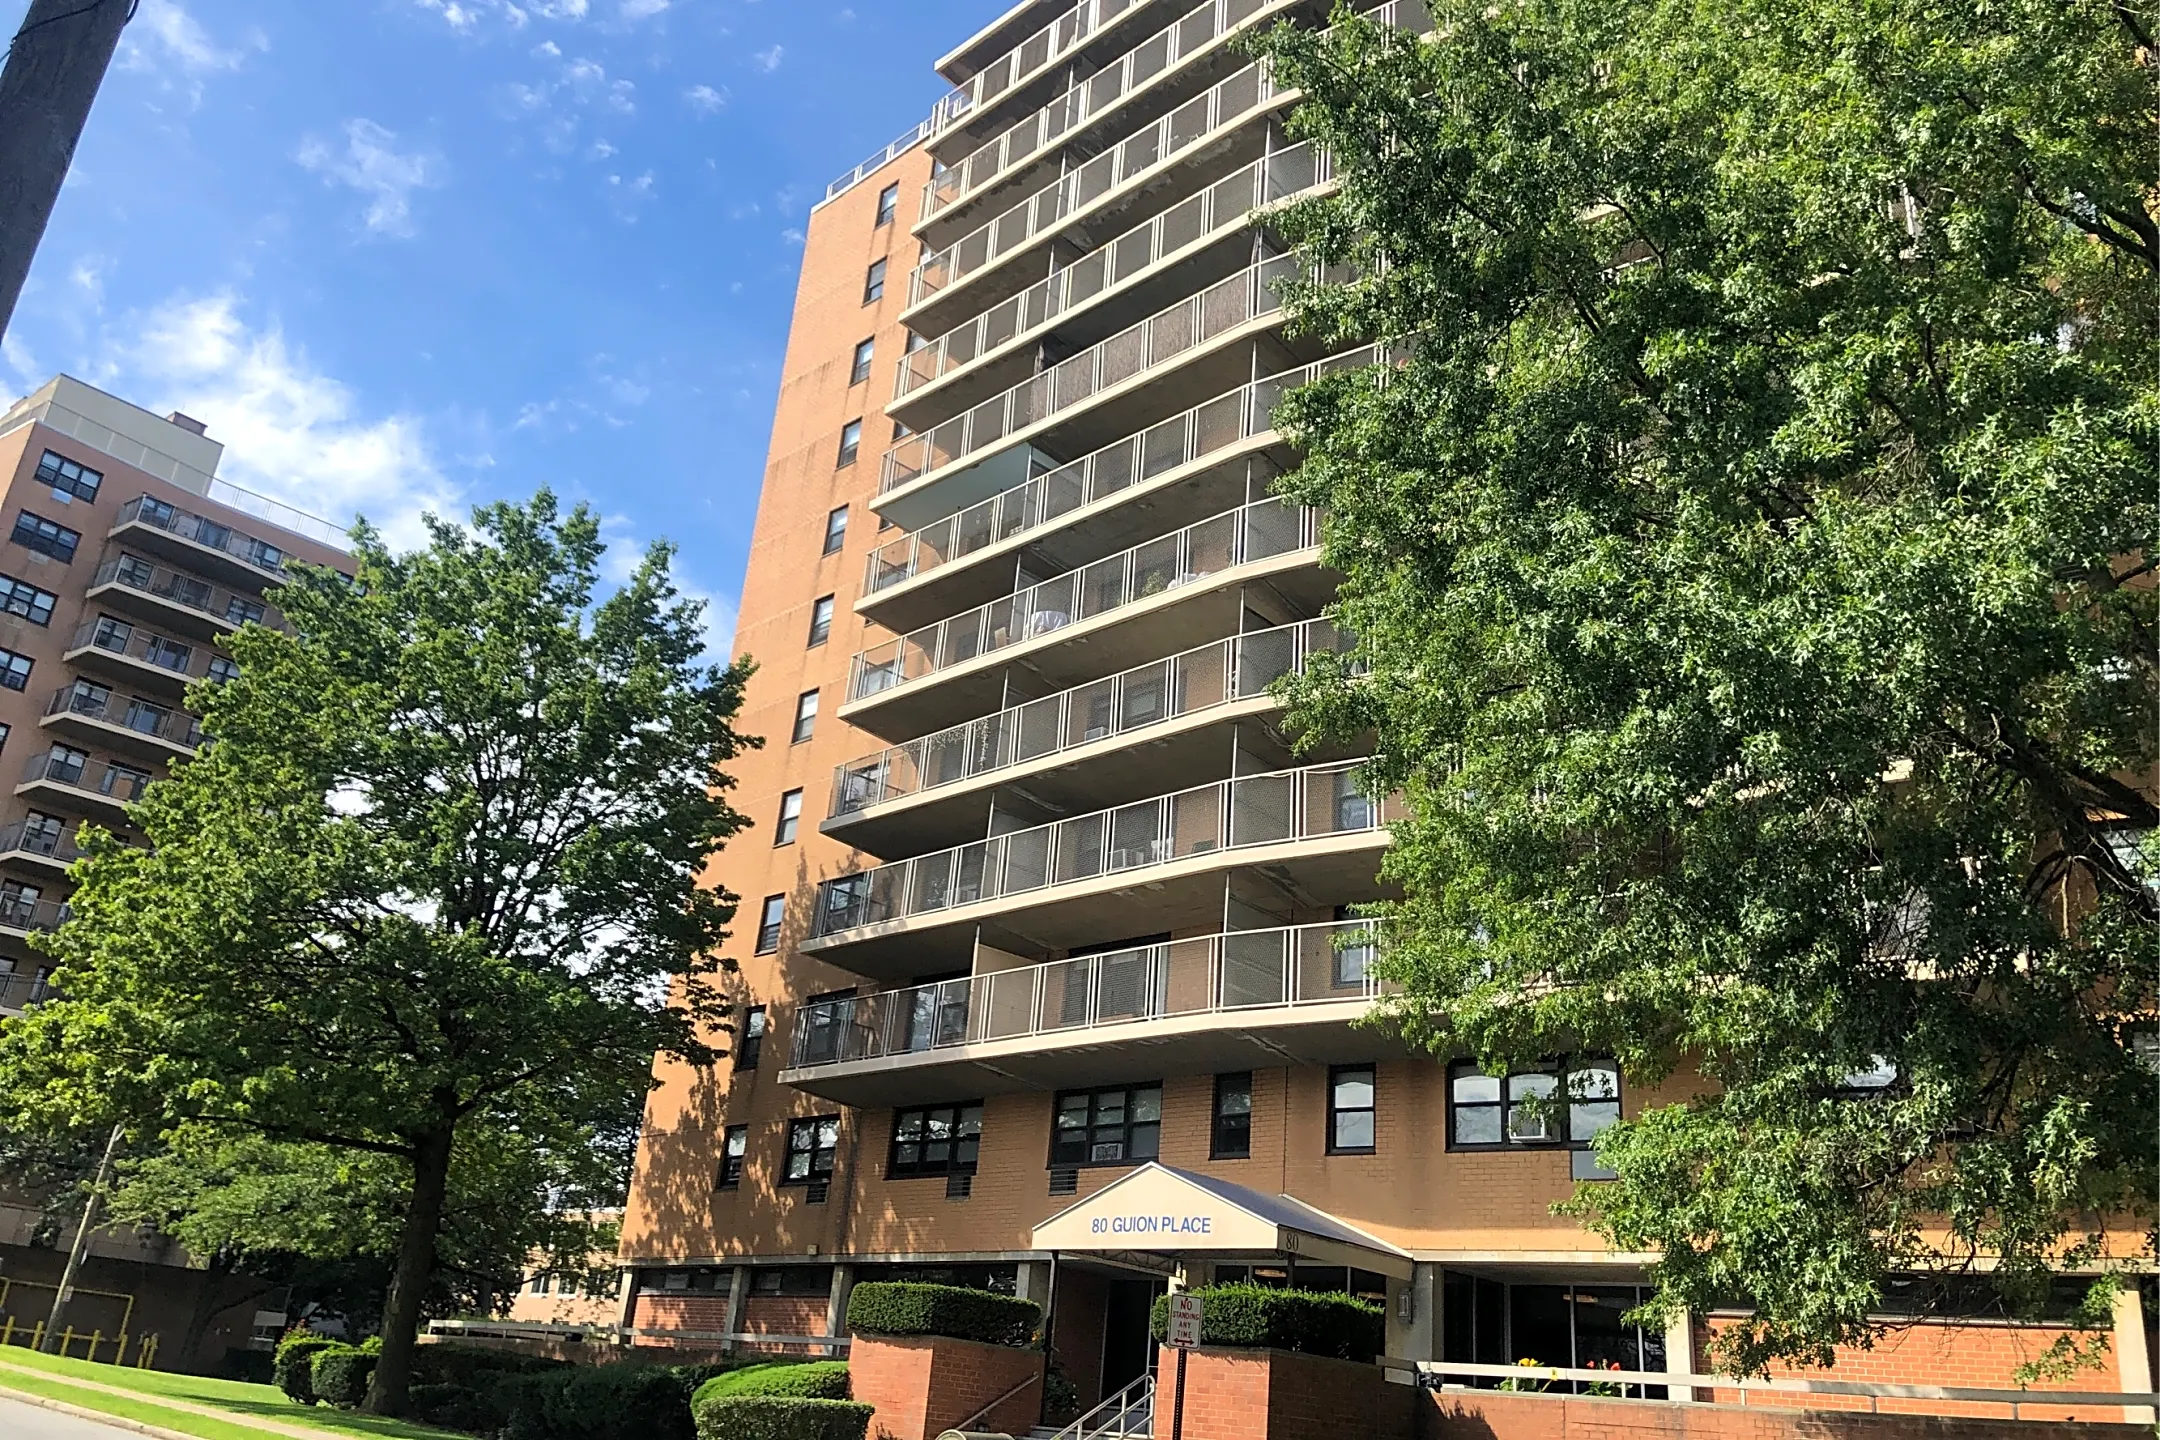 Soundview Apartments Apartments - New Rochelle, NY 10801